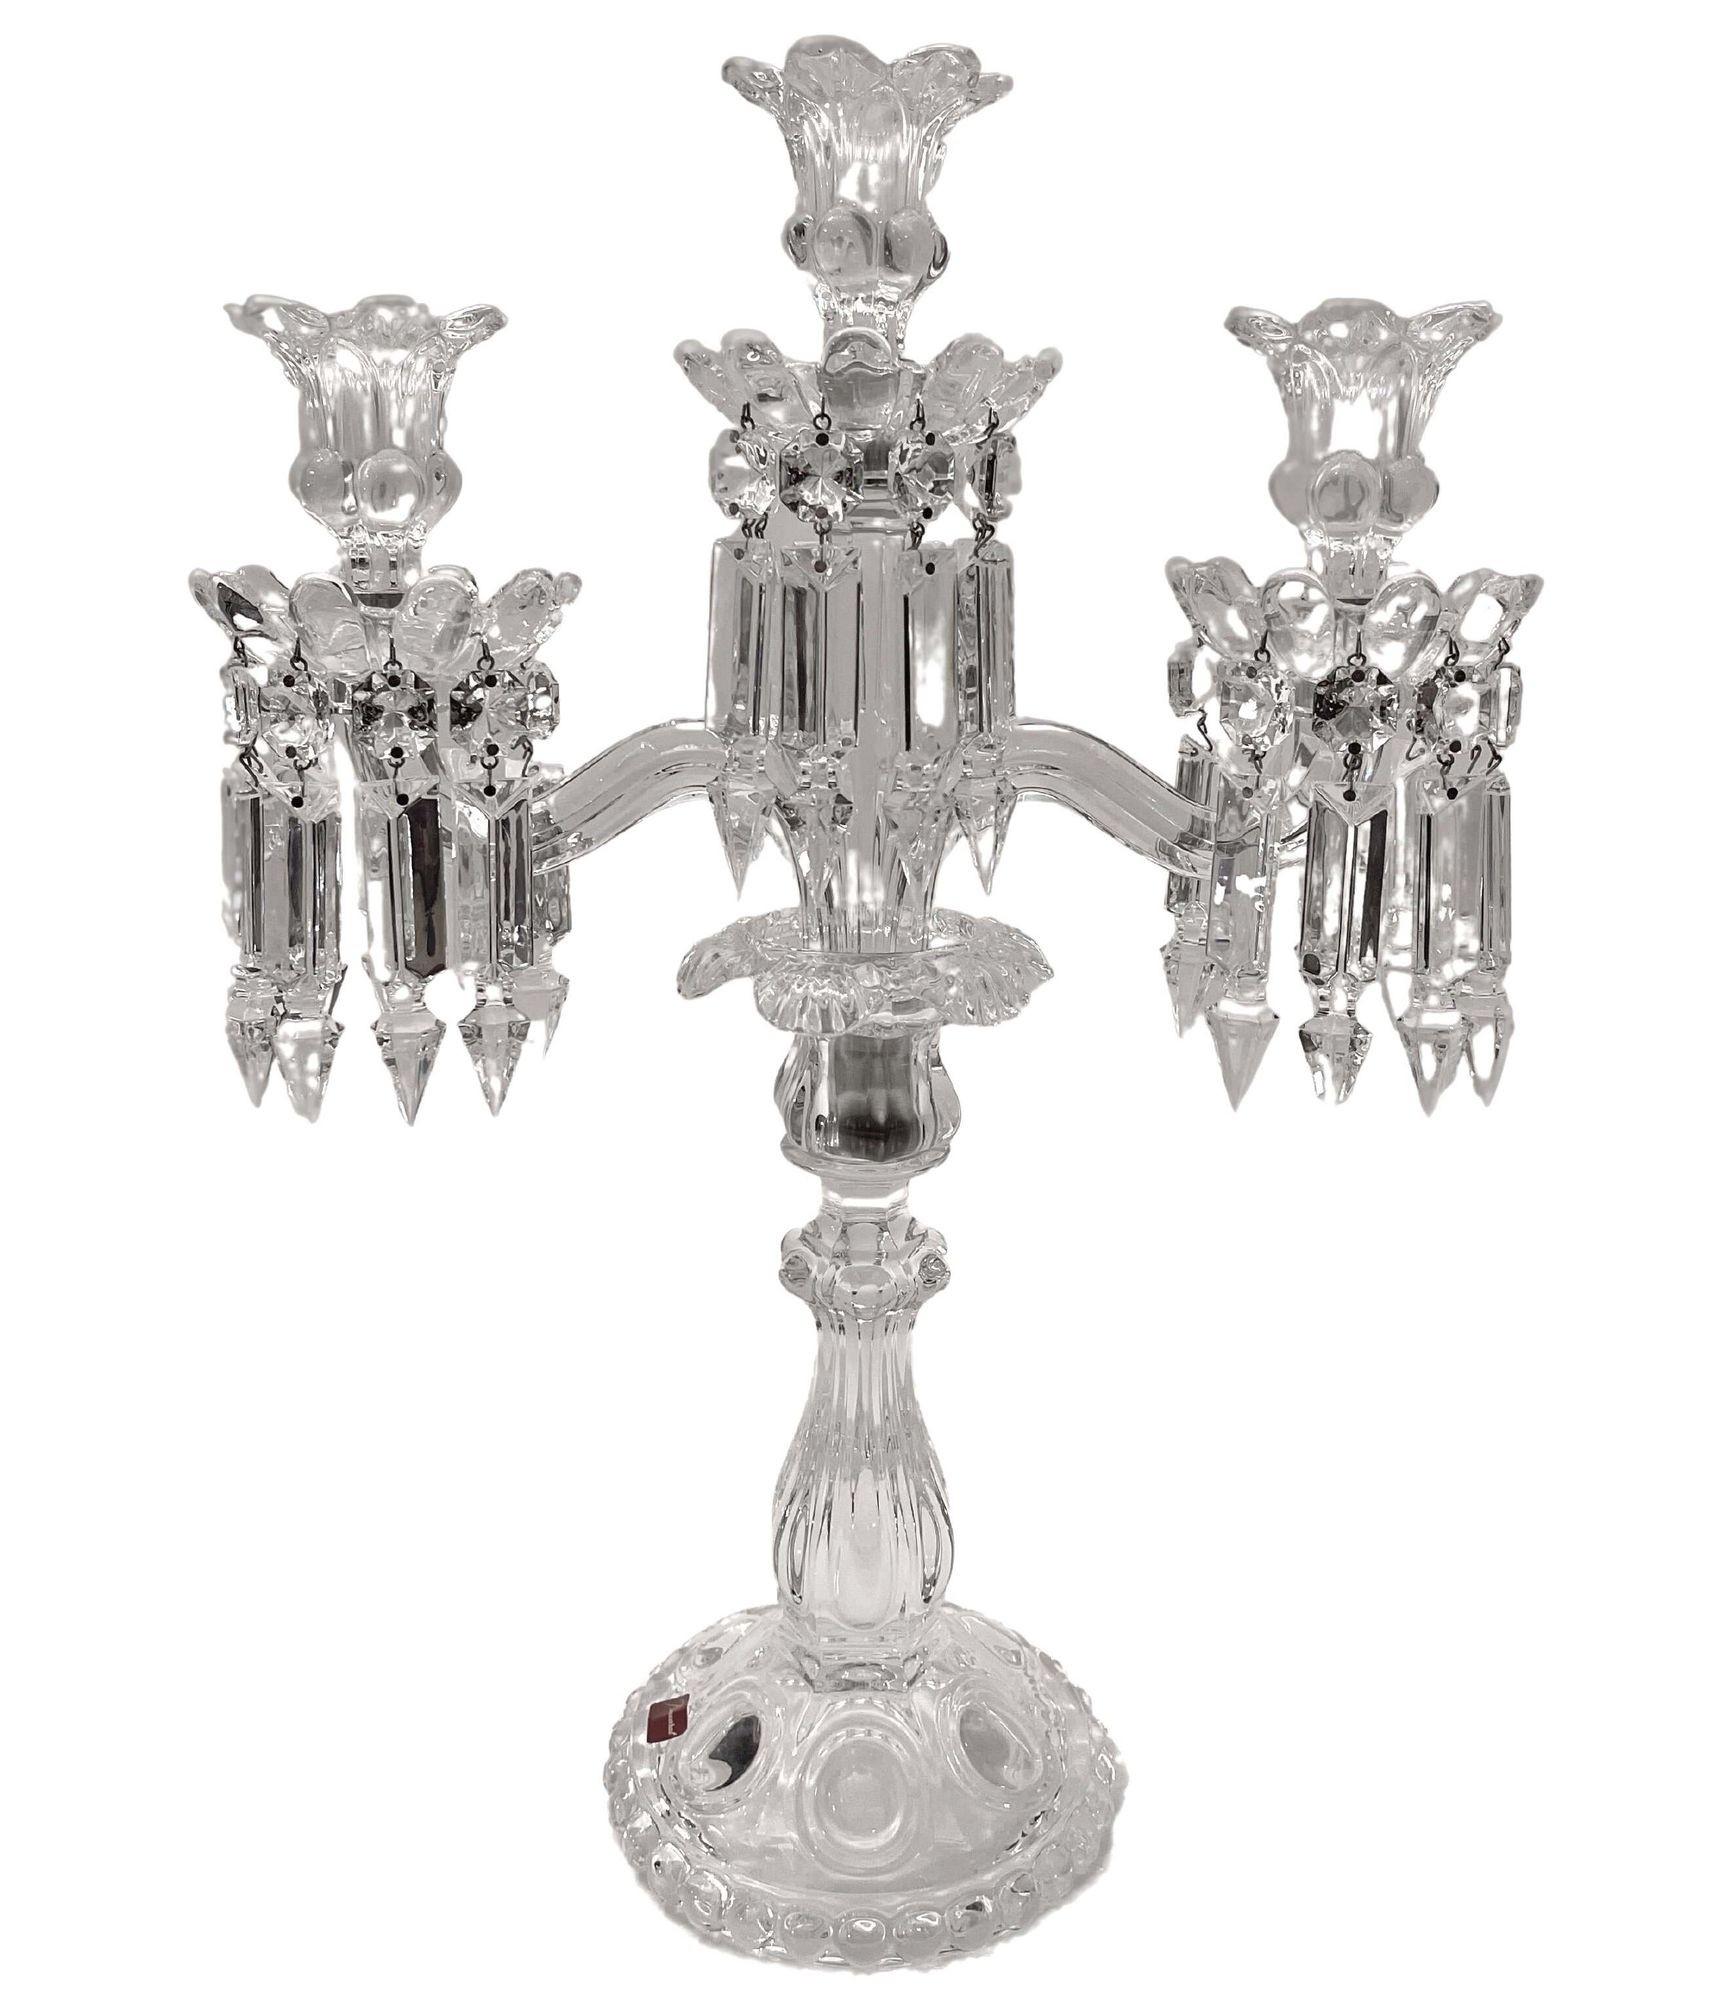 Pair of Mid-Century Modern neoclassical glass Obelisk candelabras by Baccarat. Handblown, etched and beveled translucent crystal. They also feature circular scalloped bases with demilune detailing as well as raised domed forms that incircle the